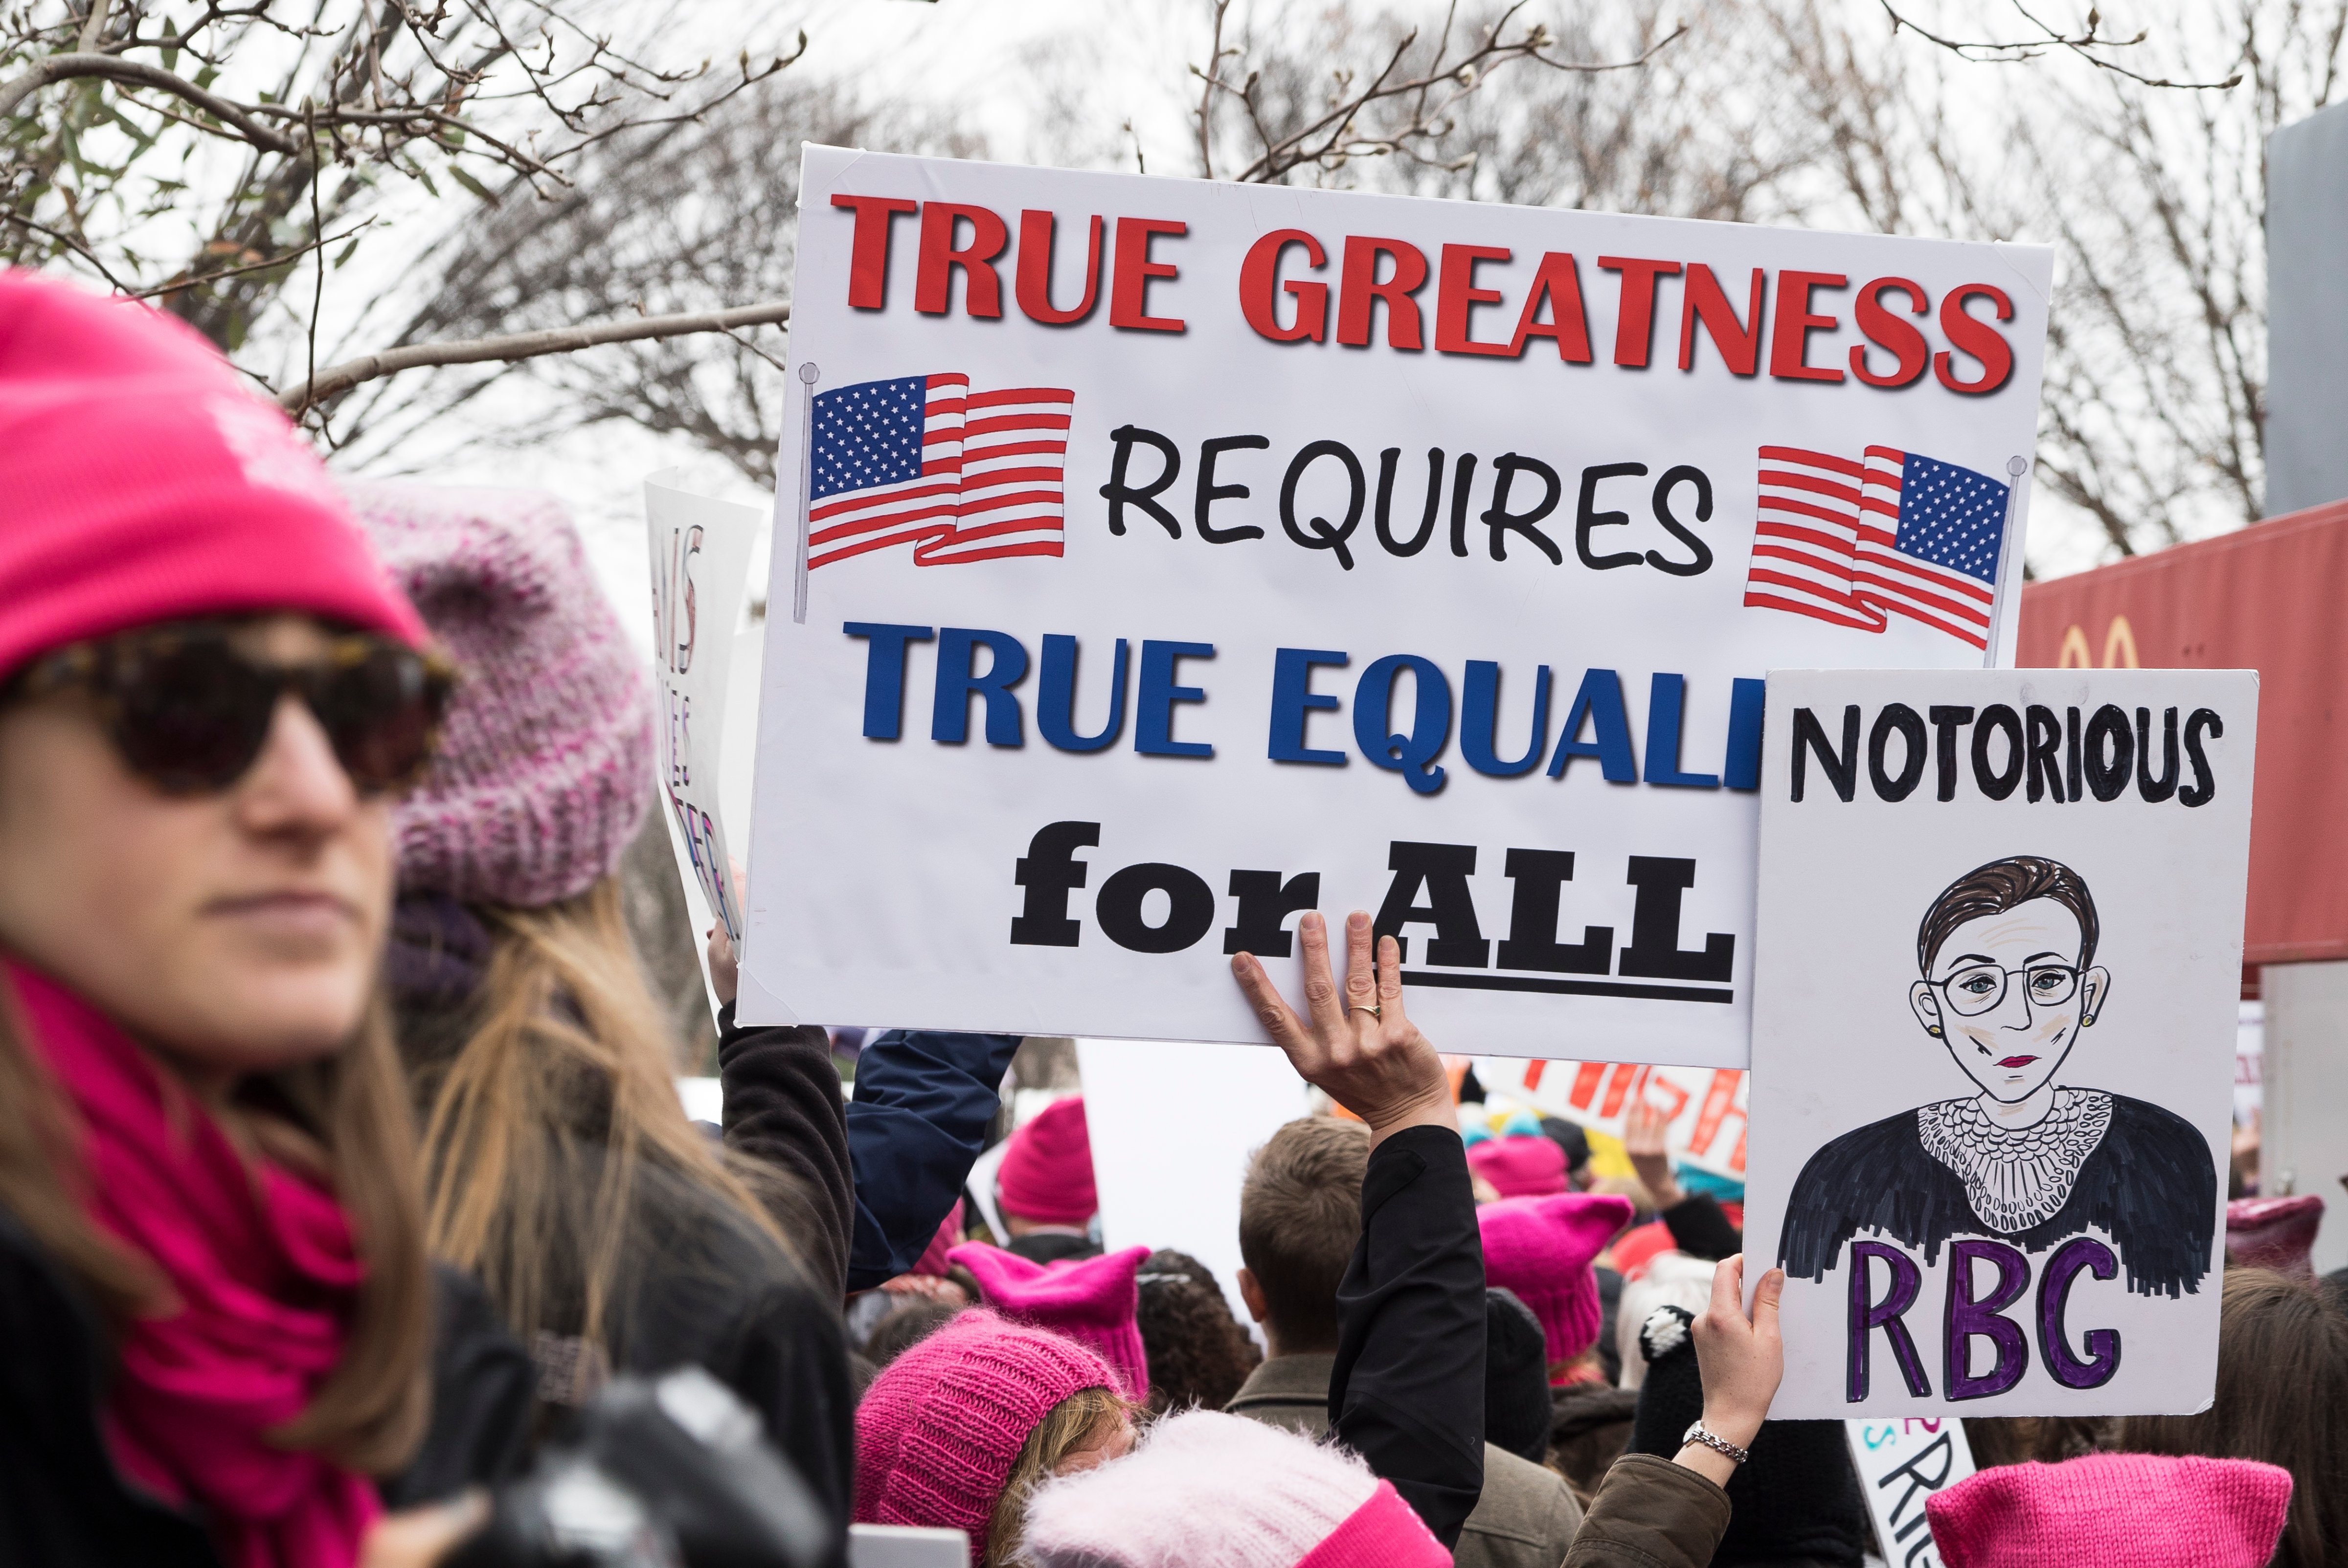 View of demonstrators, many with signs, during the Women's March on Washington, Washington DC, January 21, 2017. One sign features an illustration of US Supreme Court Justice Ruth Bader Ginsburg and reads 'Notorious RBG'. (Photo by Barbara Alper/Getty Images) (Barbara Alper&mdash;Getty Images)